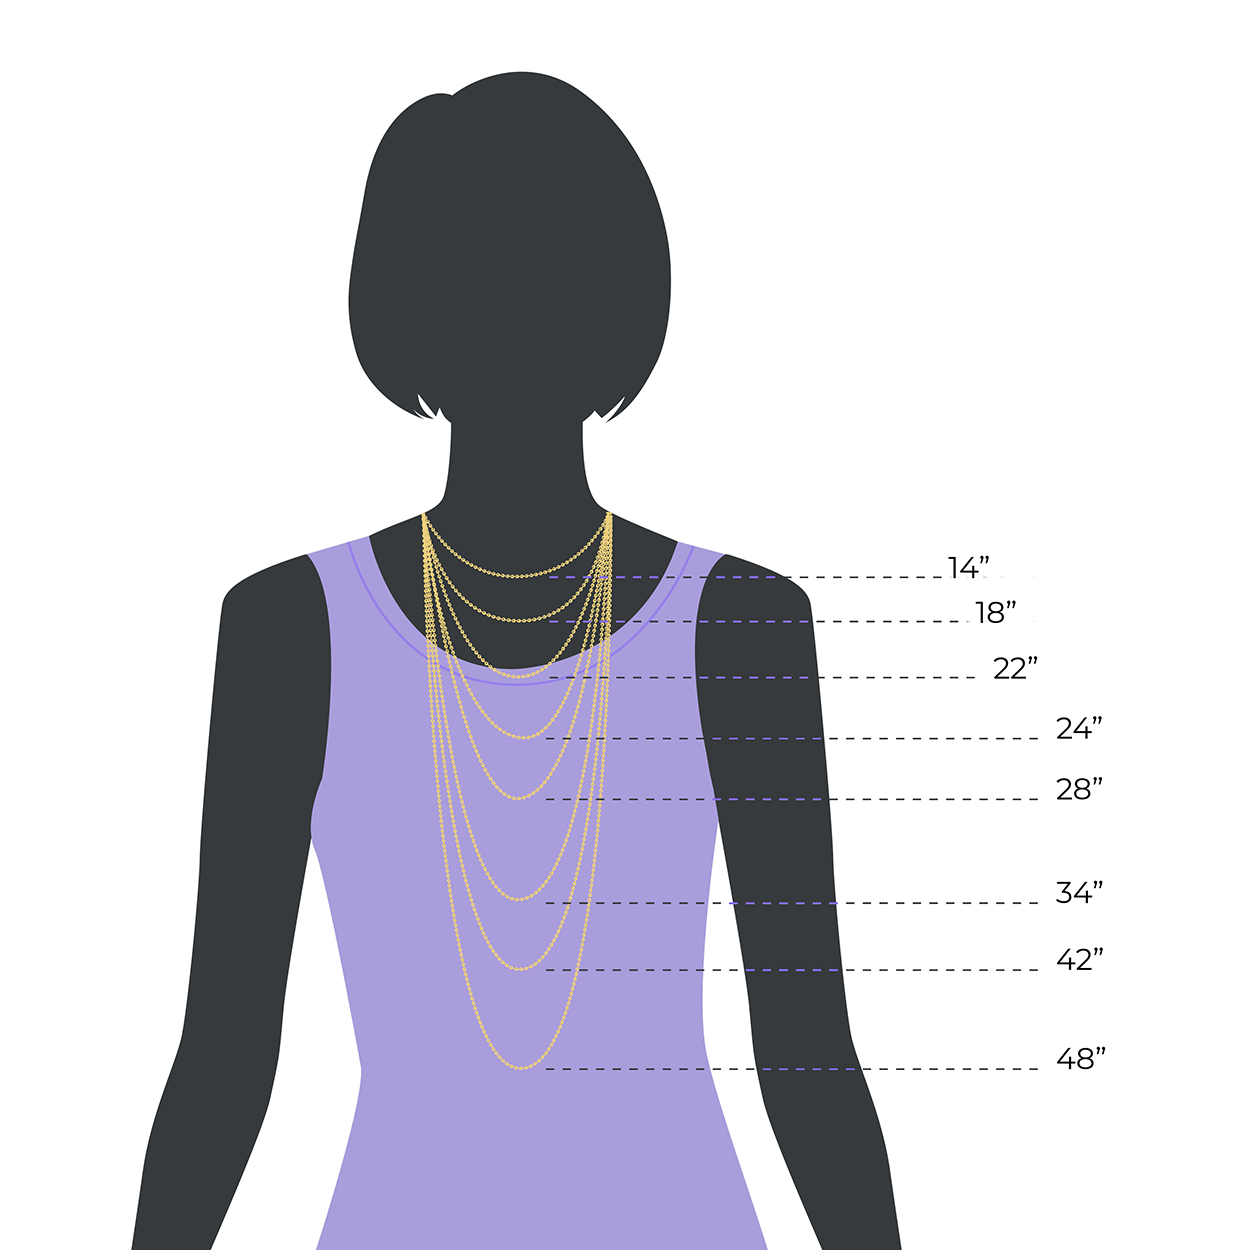 Chain Length Guide on Female Silhouette